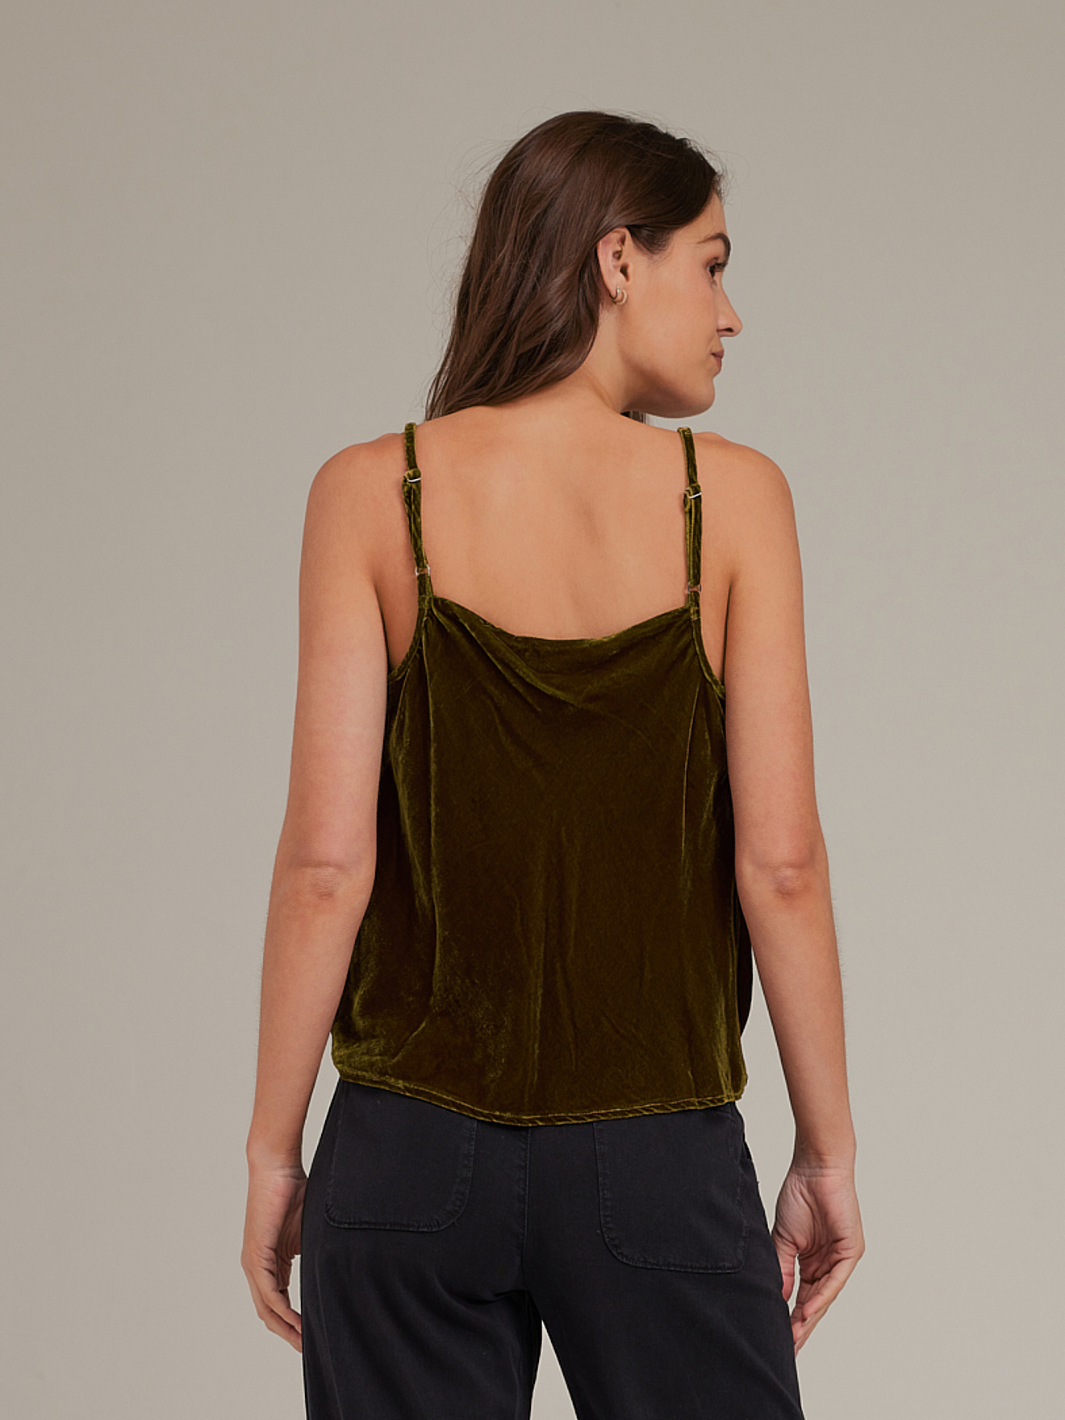 COWL NECK CAMISOLE IN OLIVE GOLD - Romi Boutique